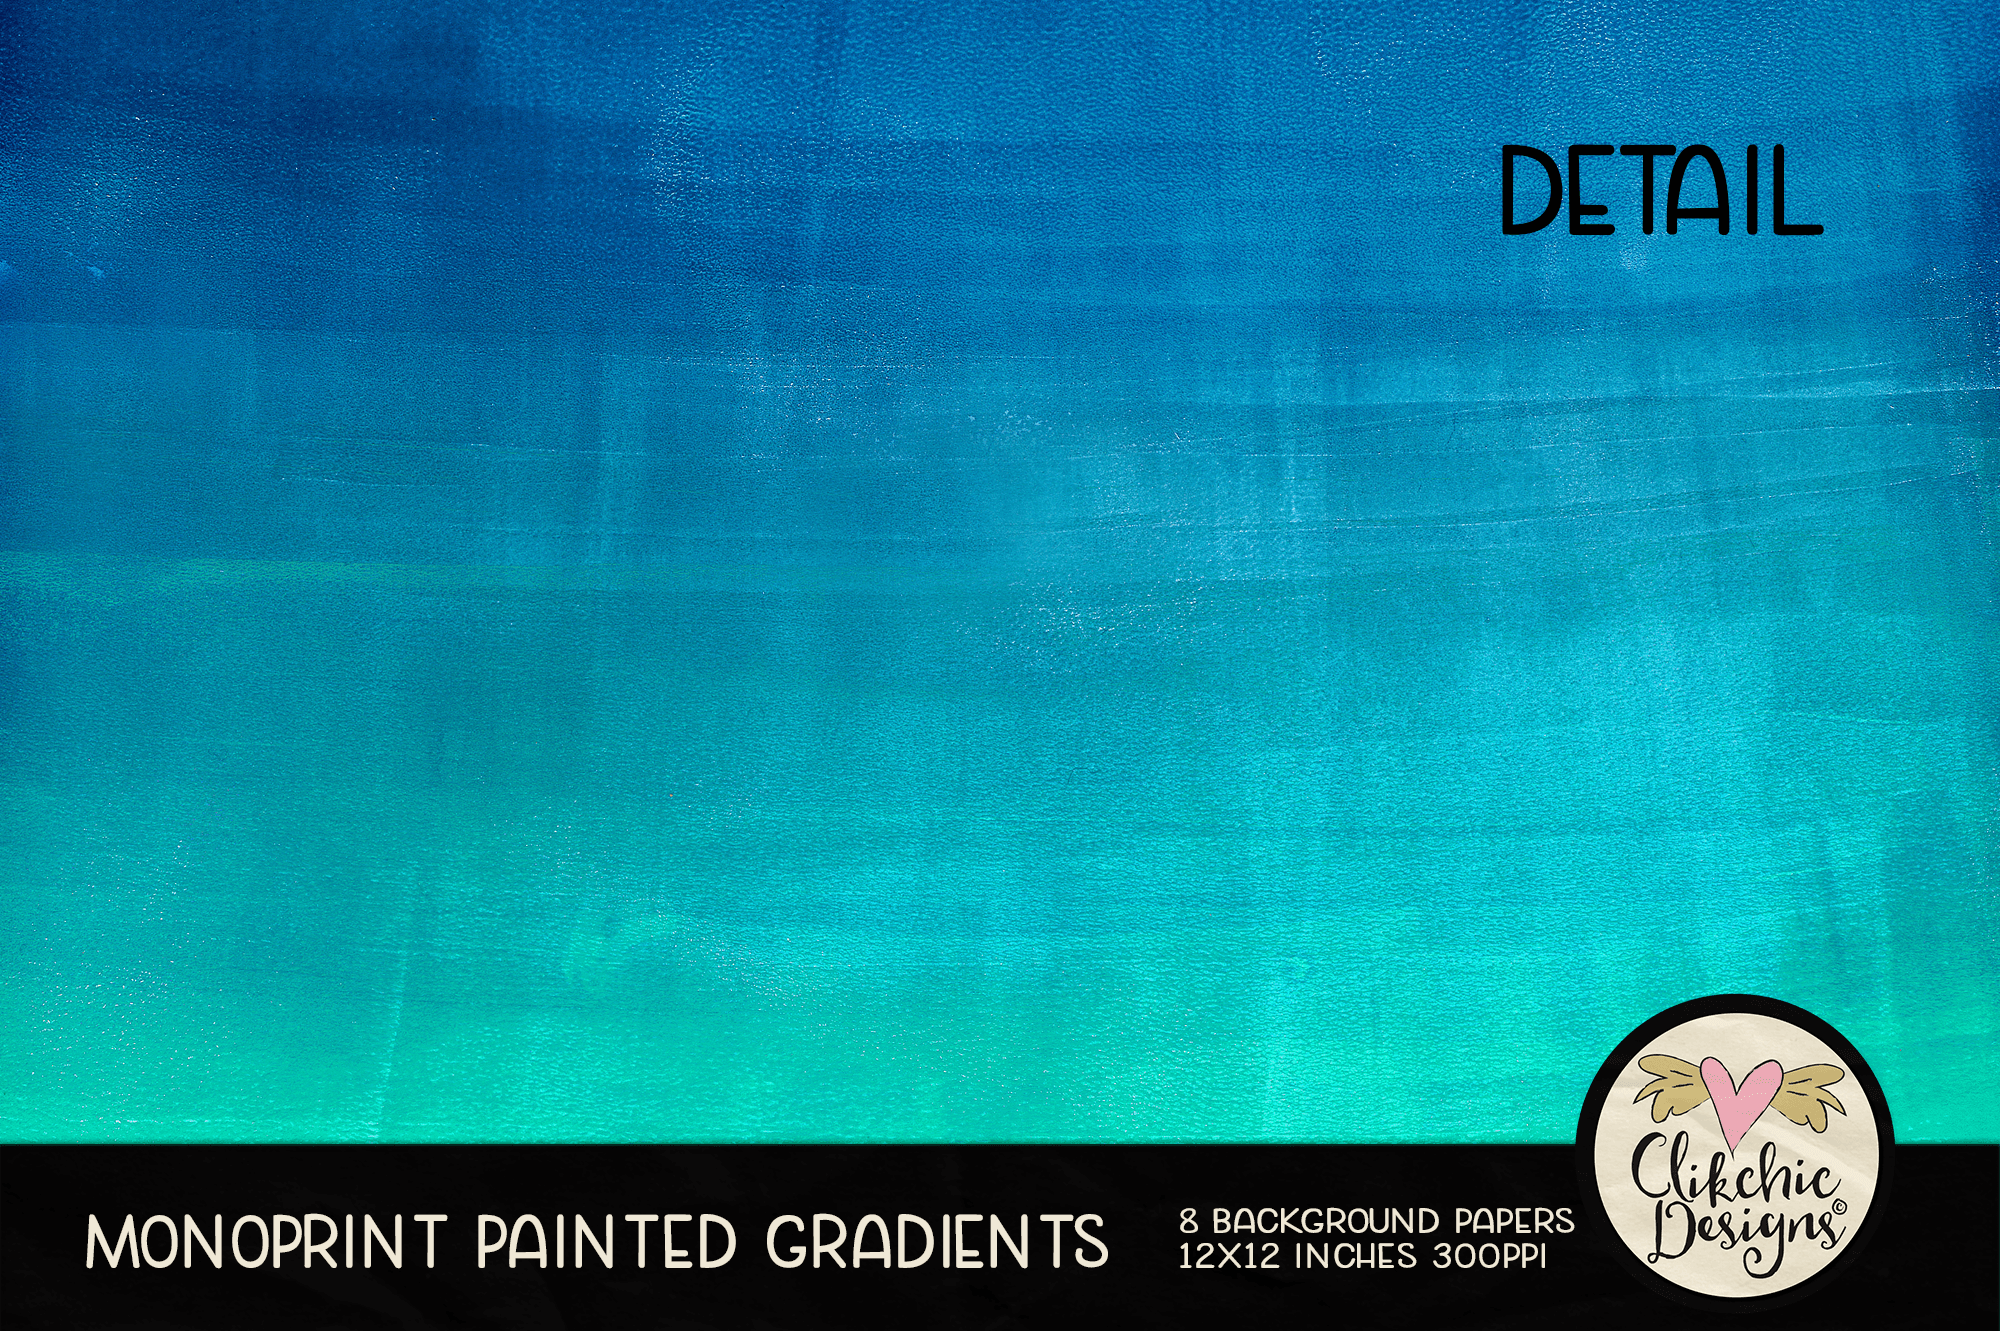 Monoprint Painted Gradients Backgrounds by Clikchic Designs